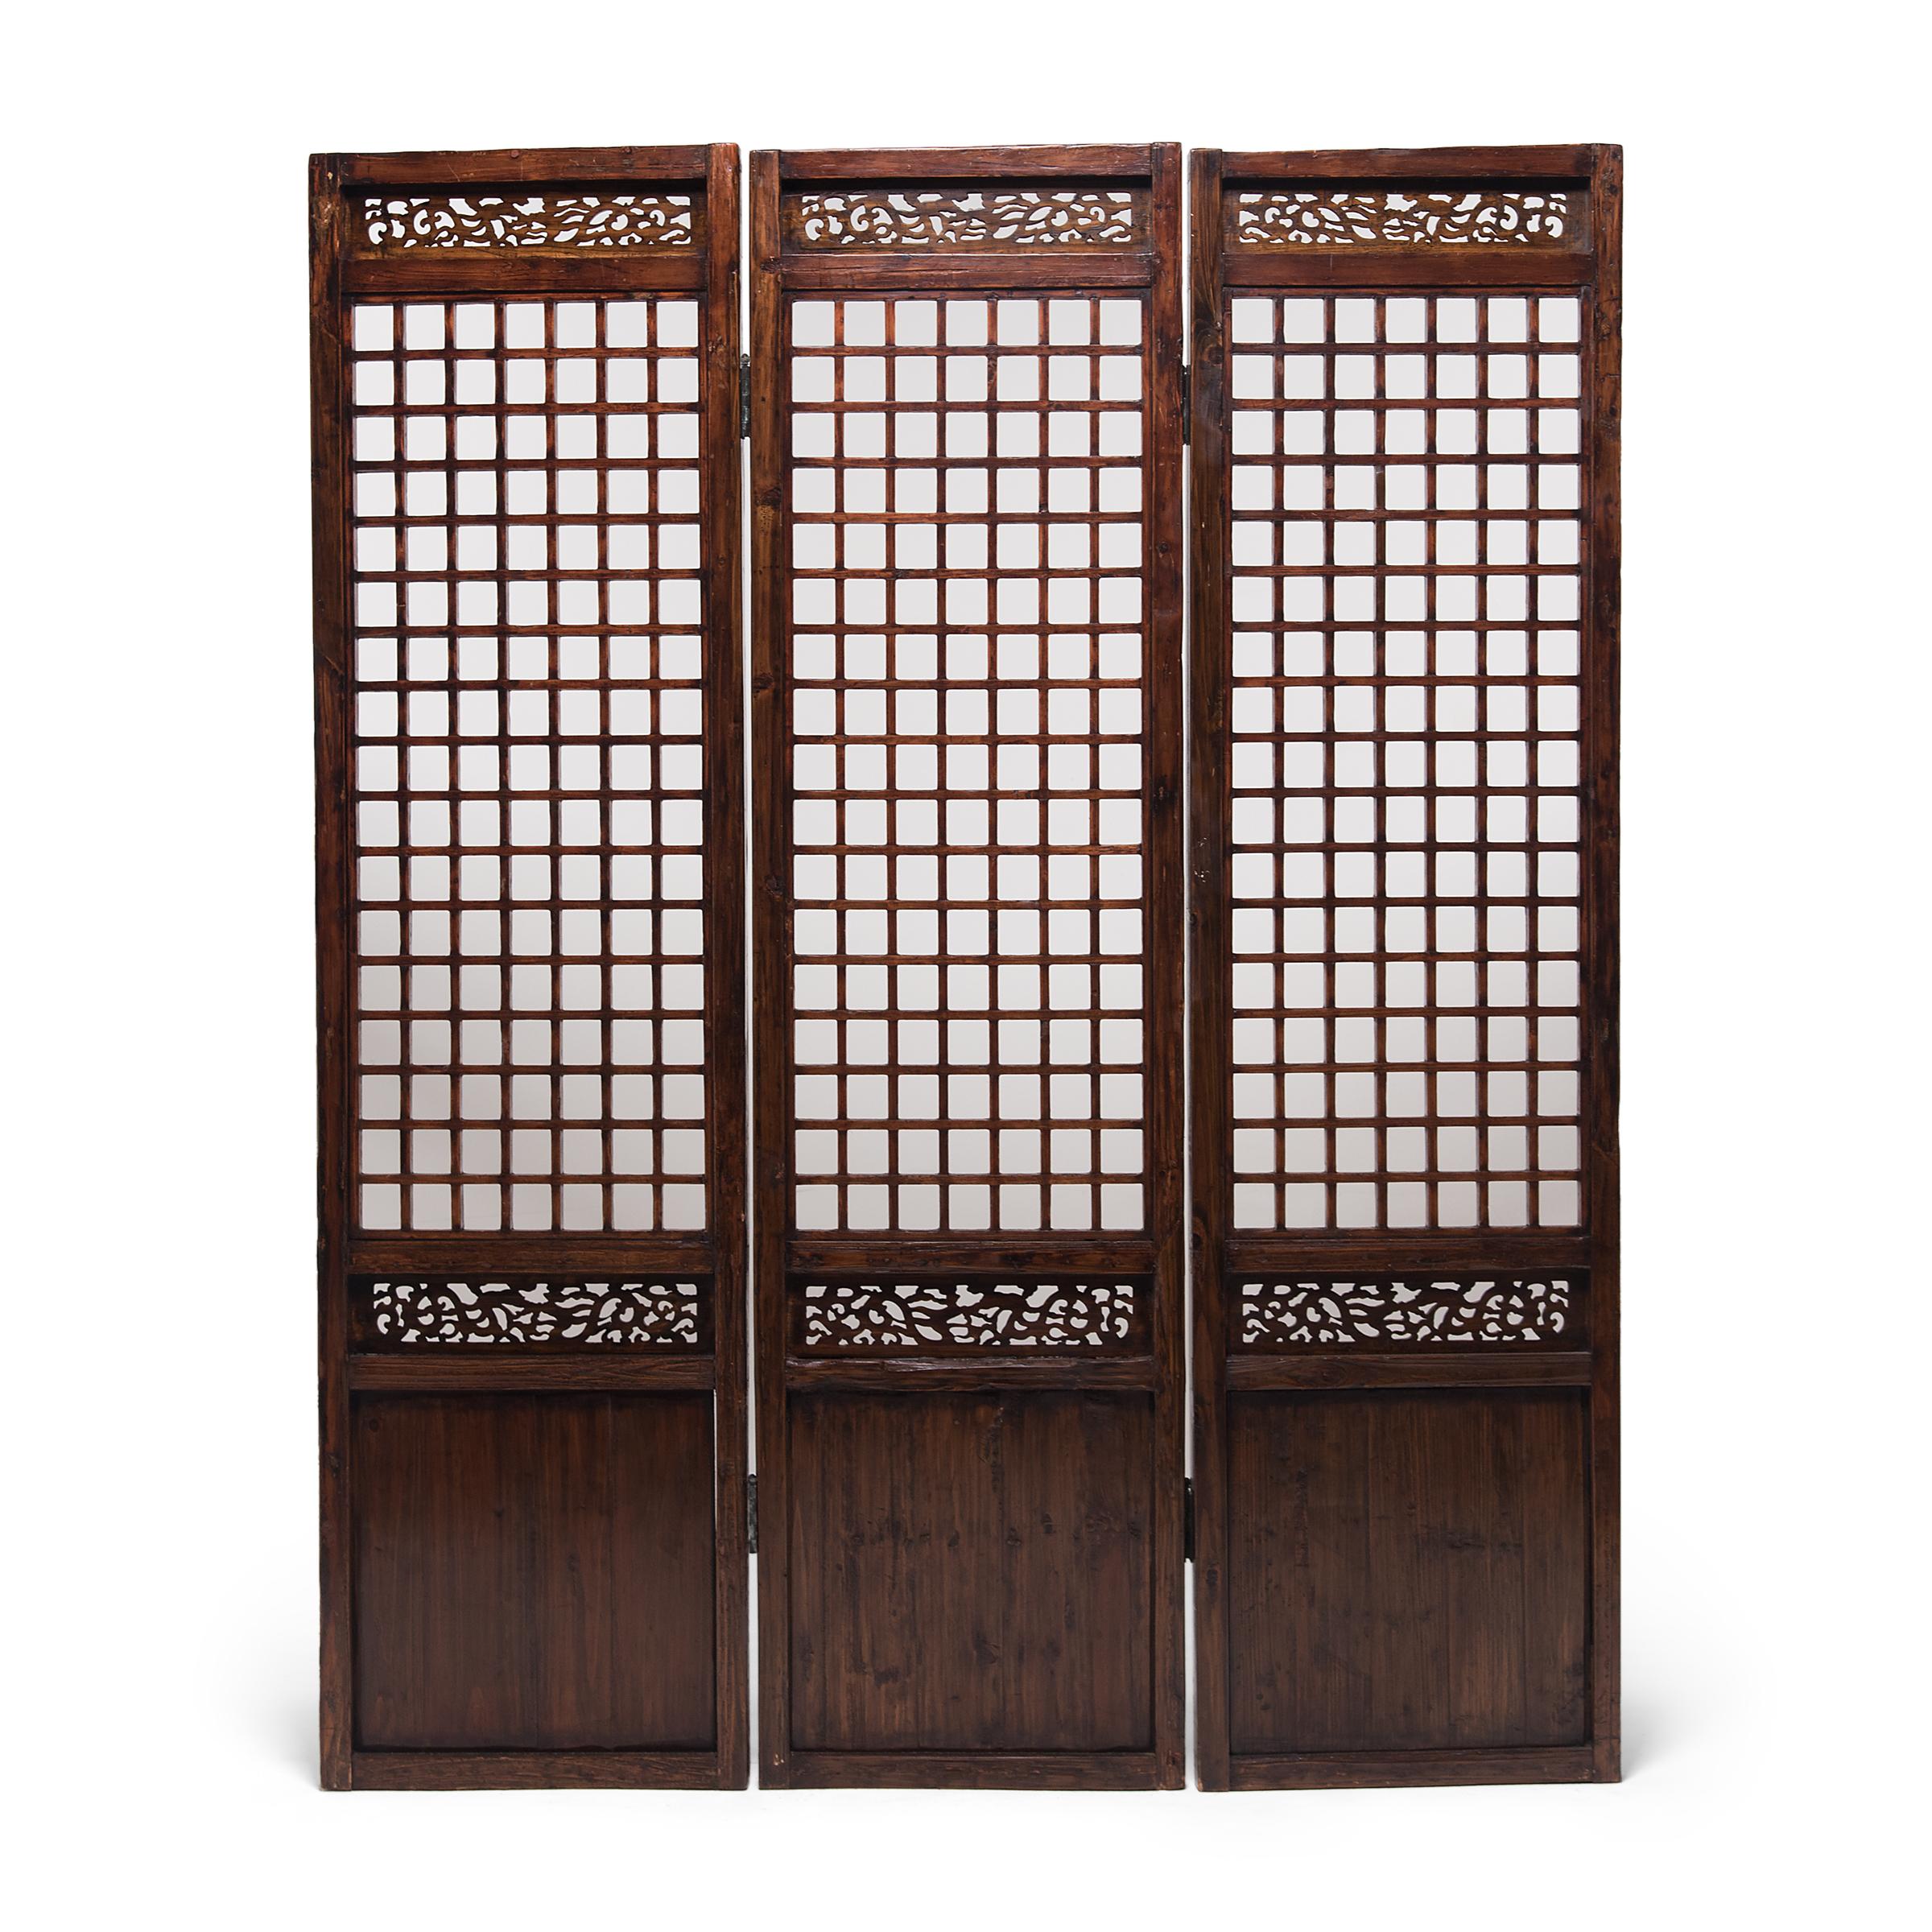 Elm Chinese Three Panel Lattice Screen with Dragon Carvings, c. 1850